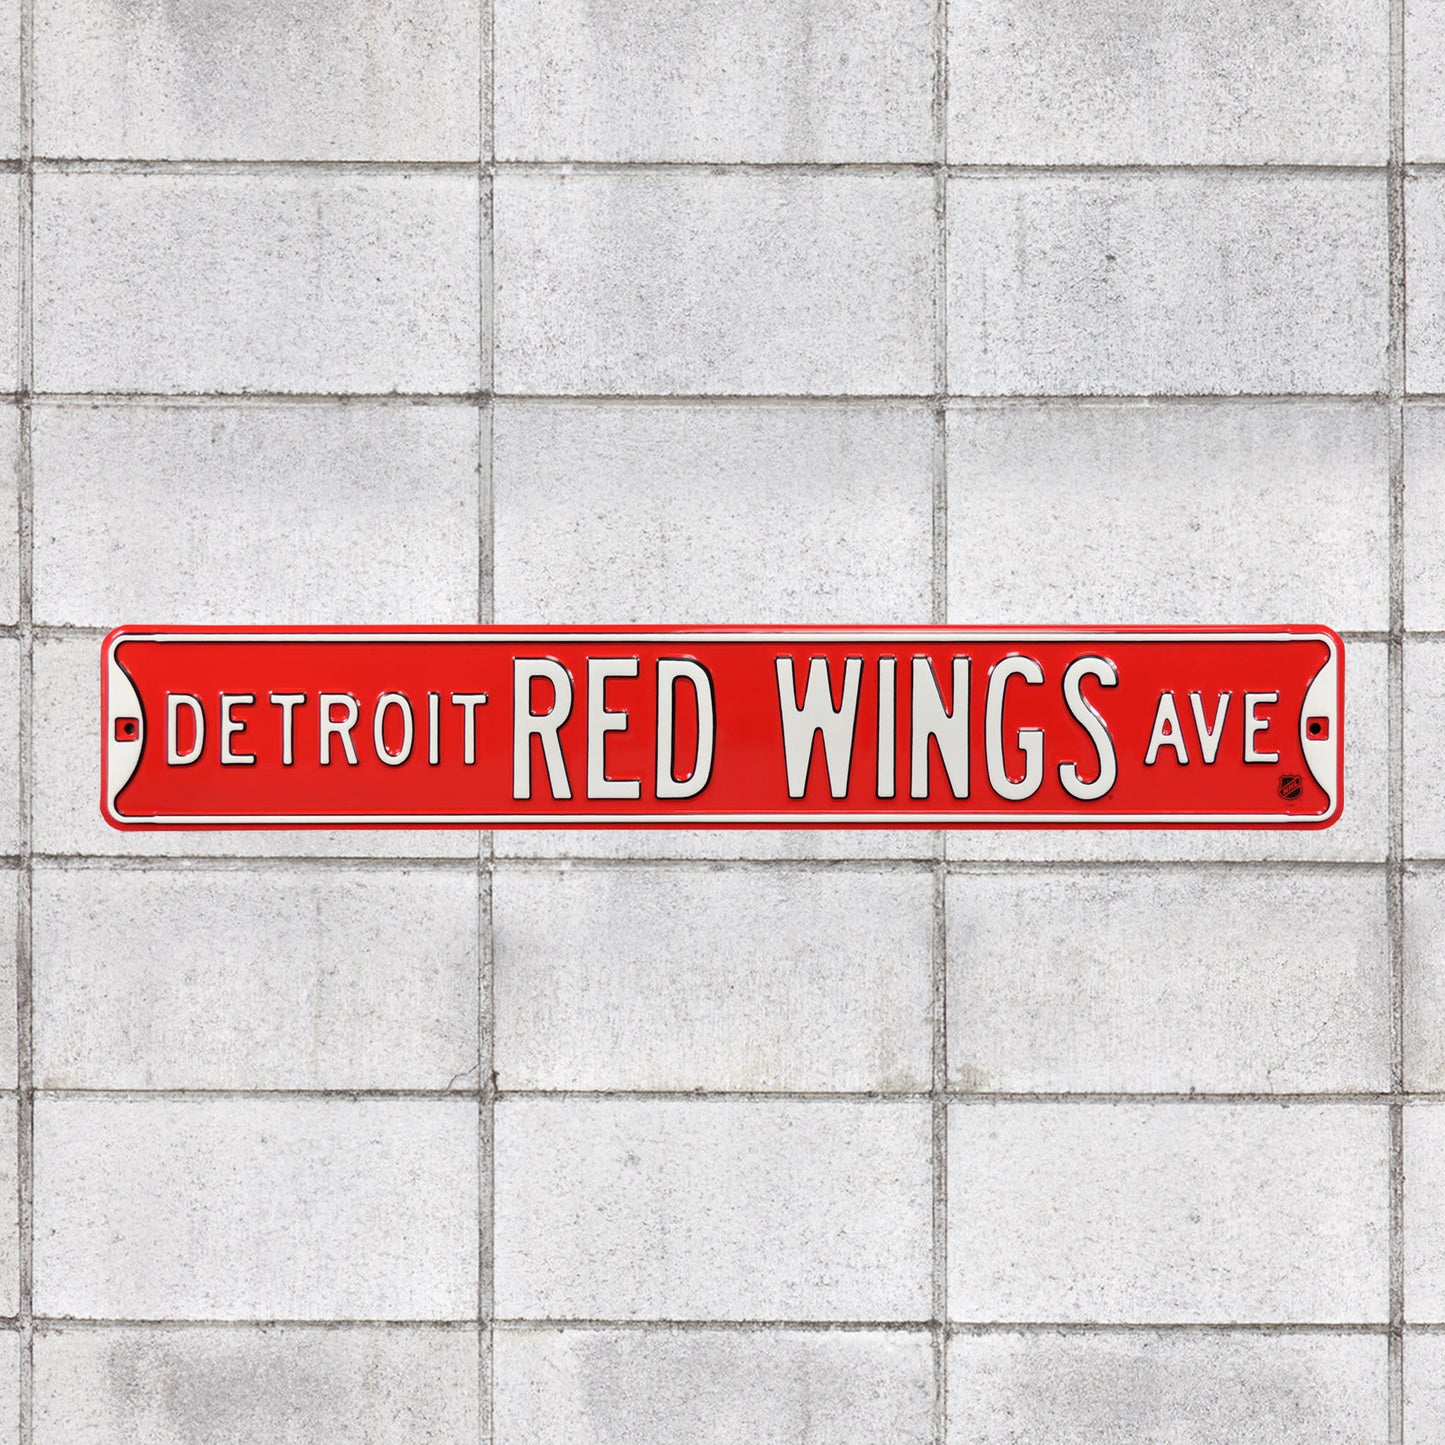 Detroit Red Wings: Detroit Red Wings Avenue - Officially Licensed NHL Metal Street Sign